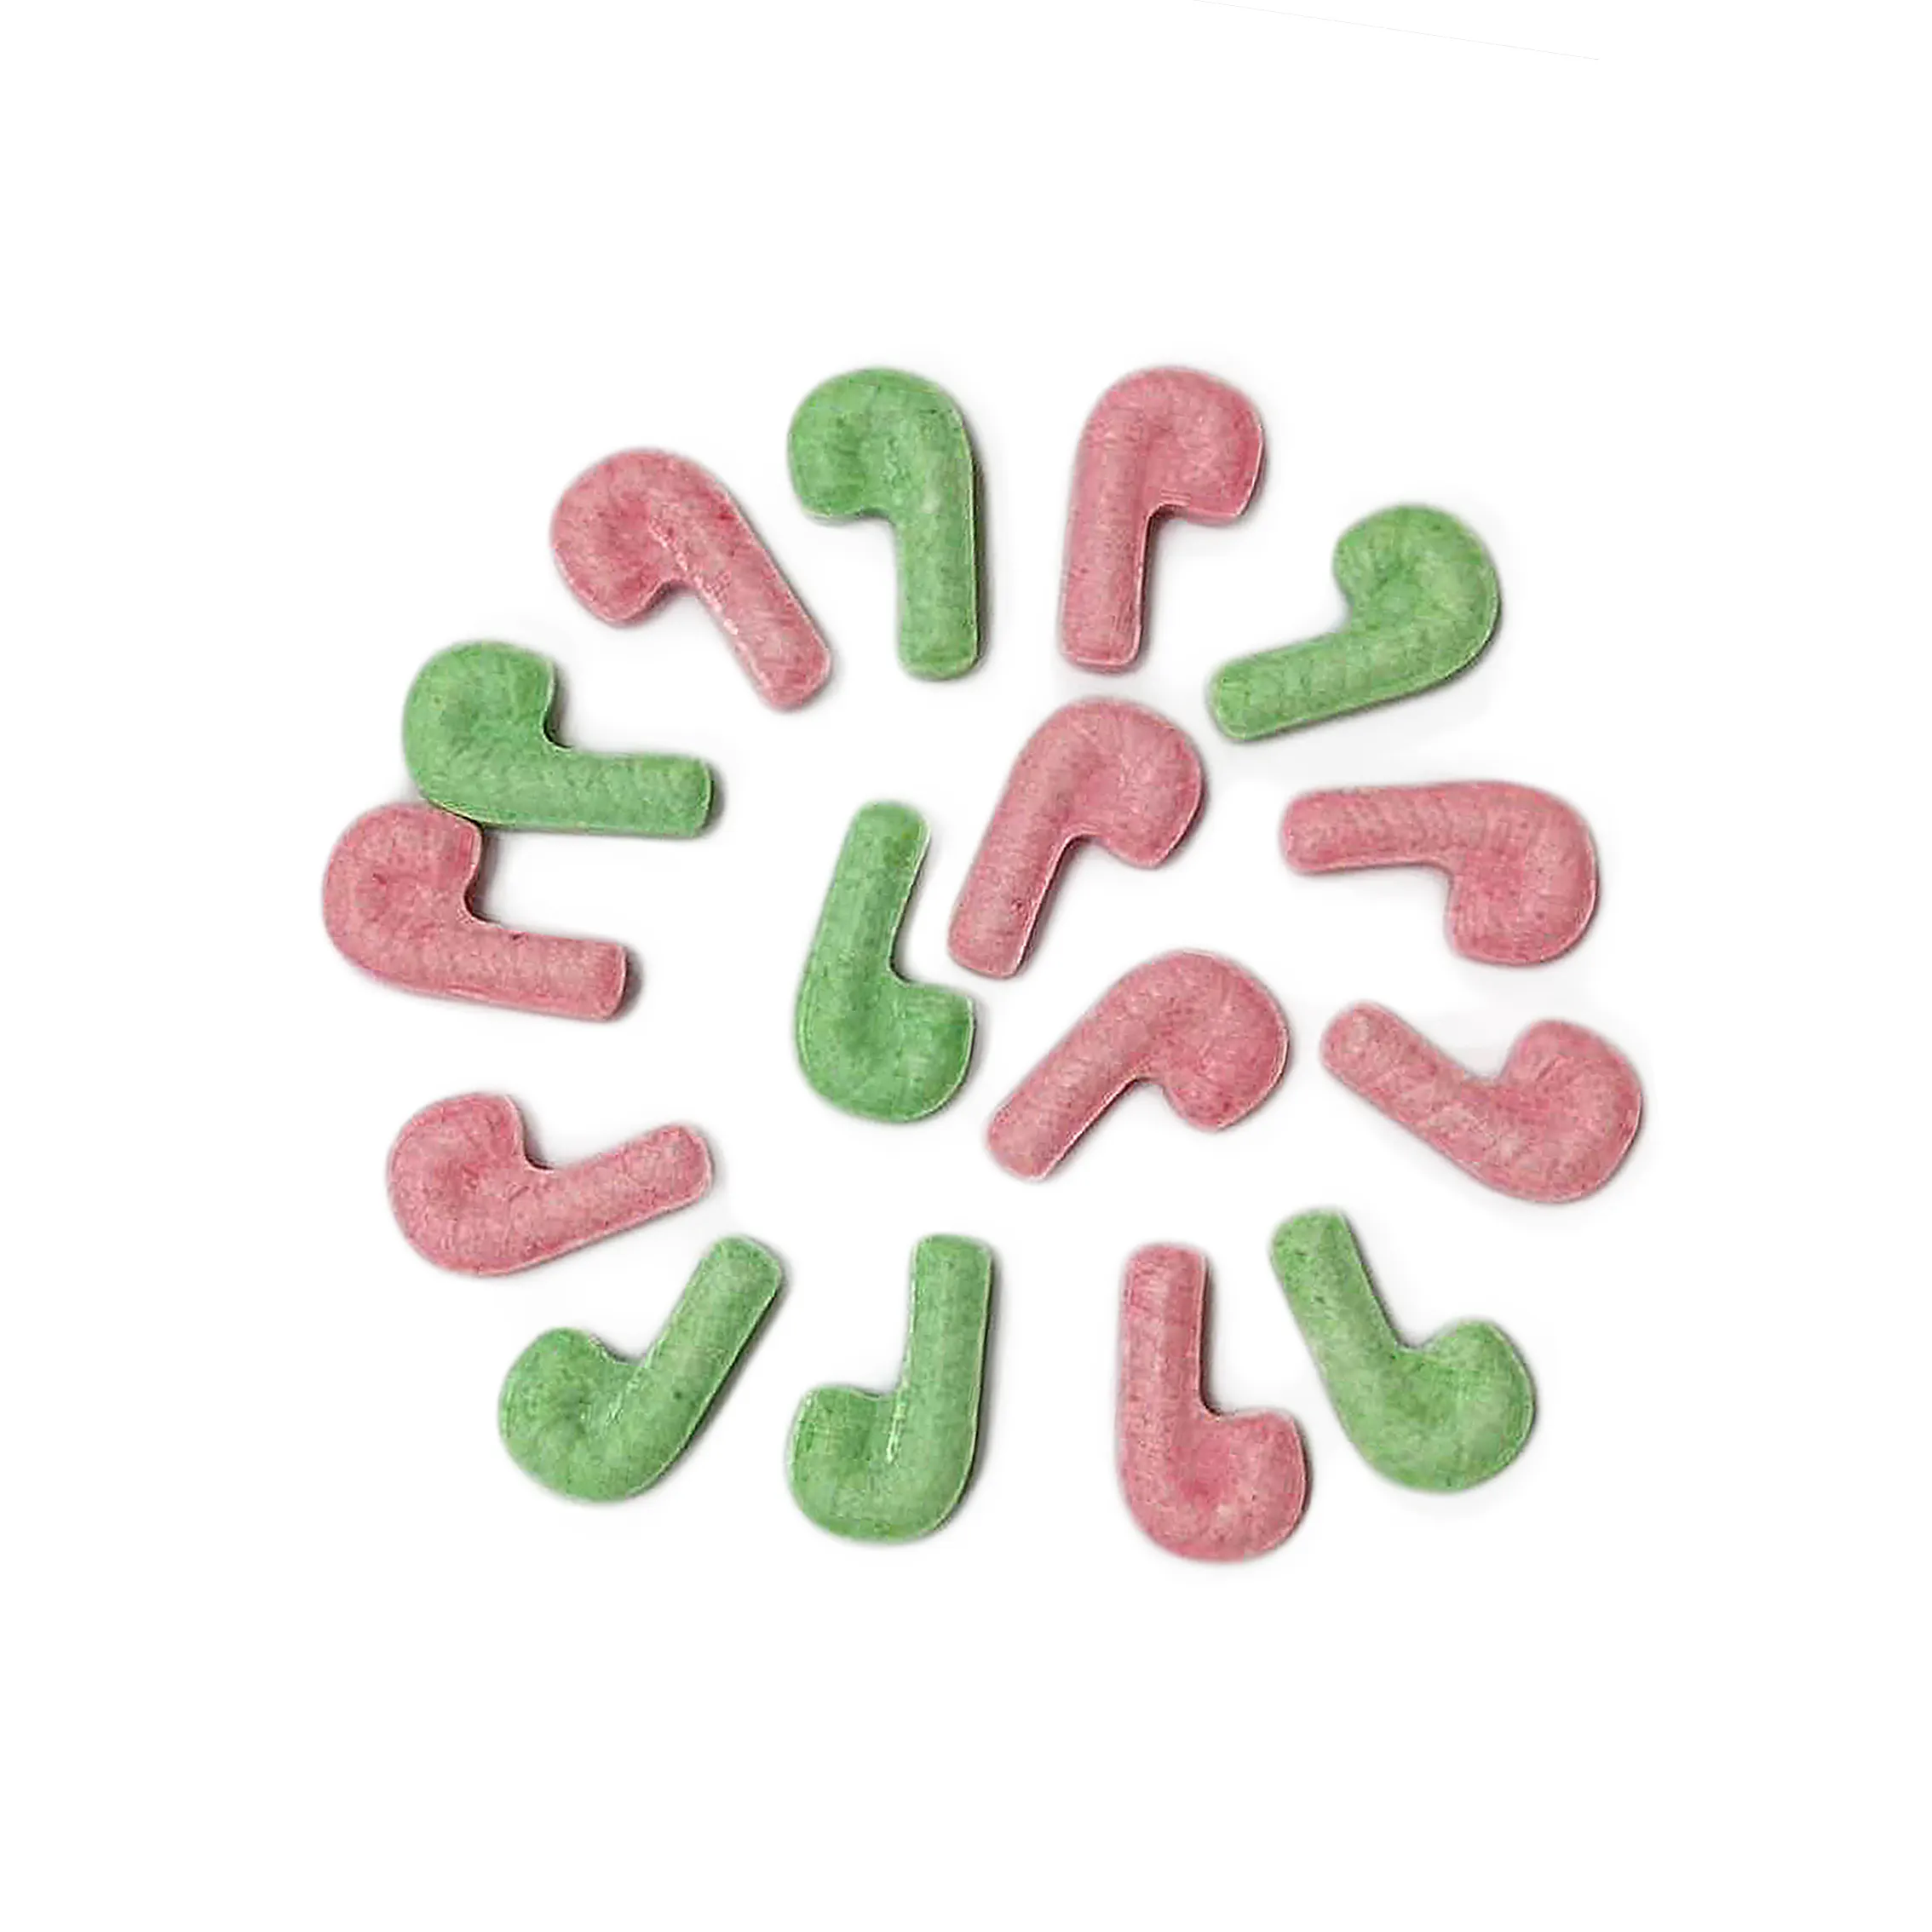 20g Candy Cane Press Candy In Tablet Crutch Candy